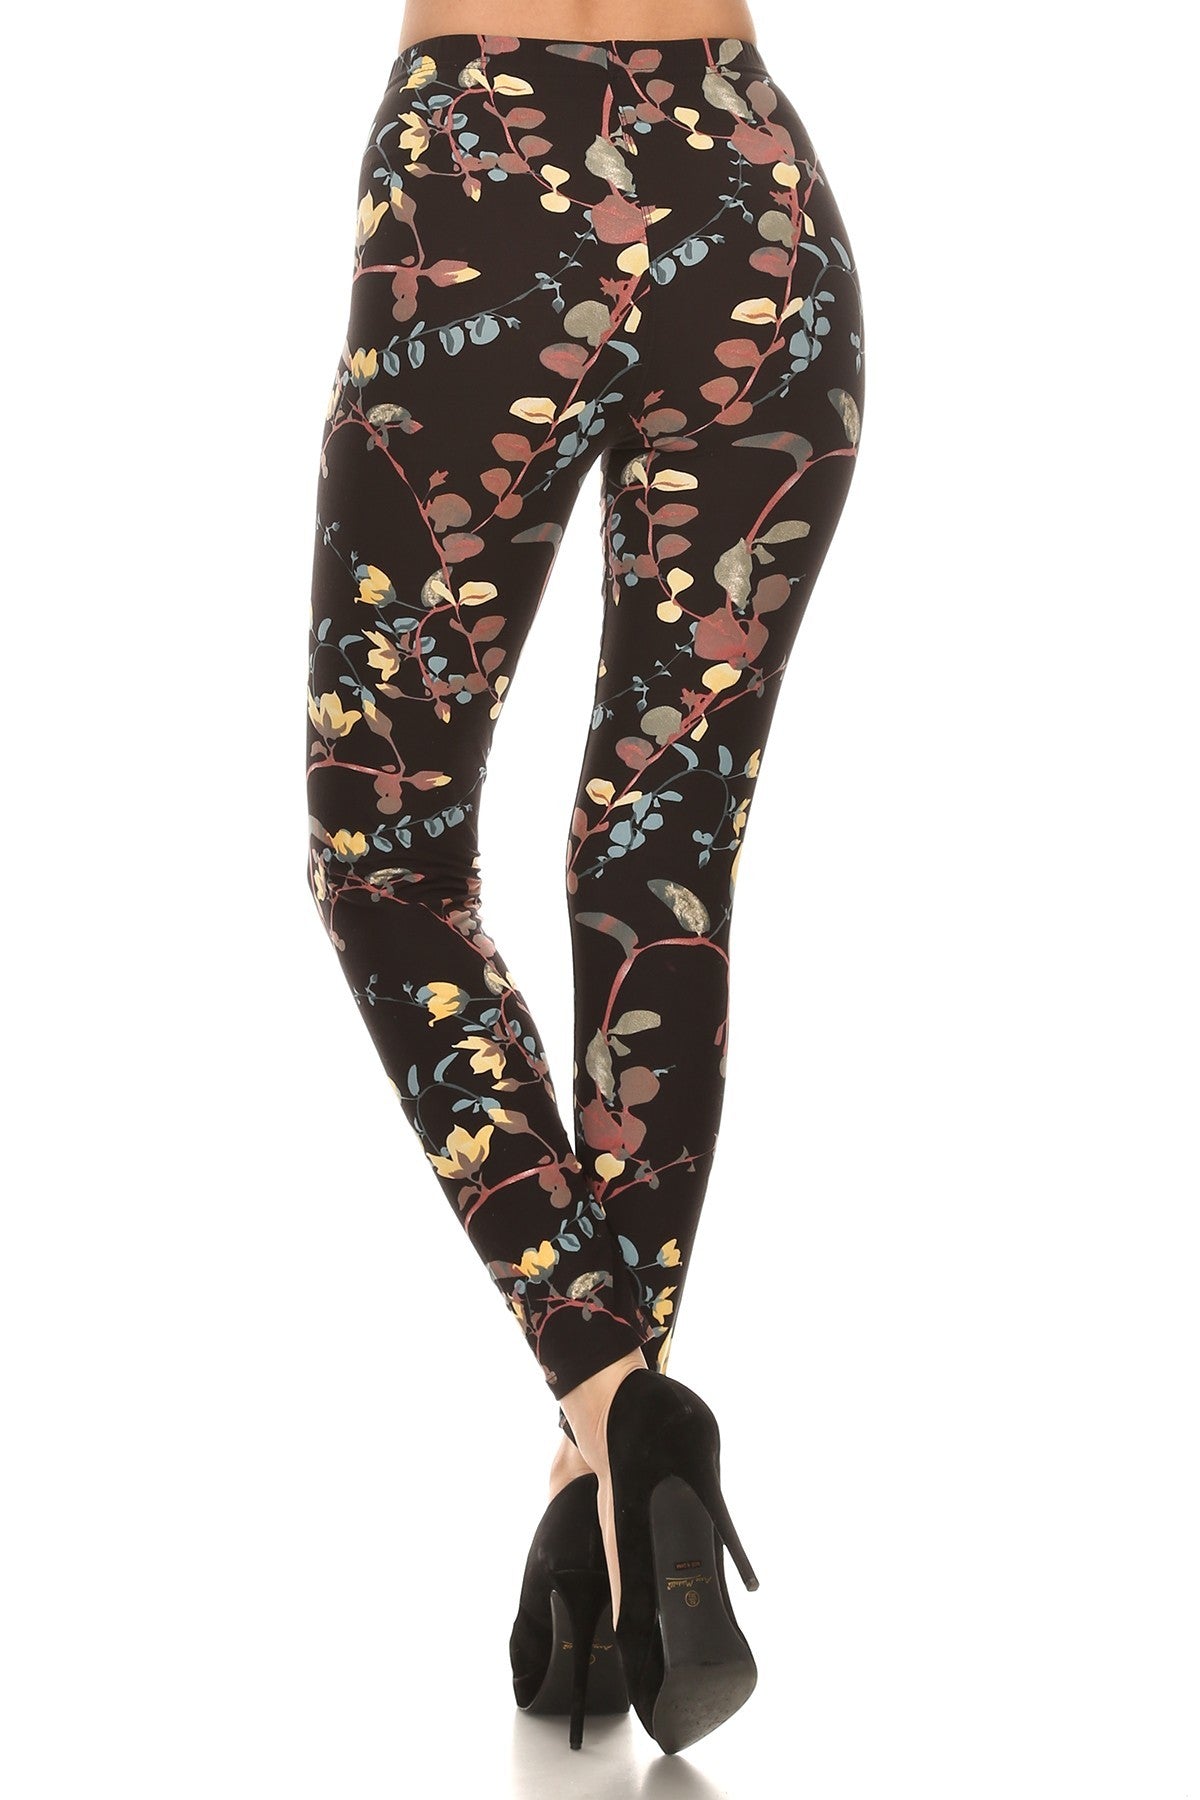 Vine Printed High Waisted Knit Leggings In Skinny Fit With Elastic Waistband sneakerhypesusa